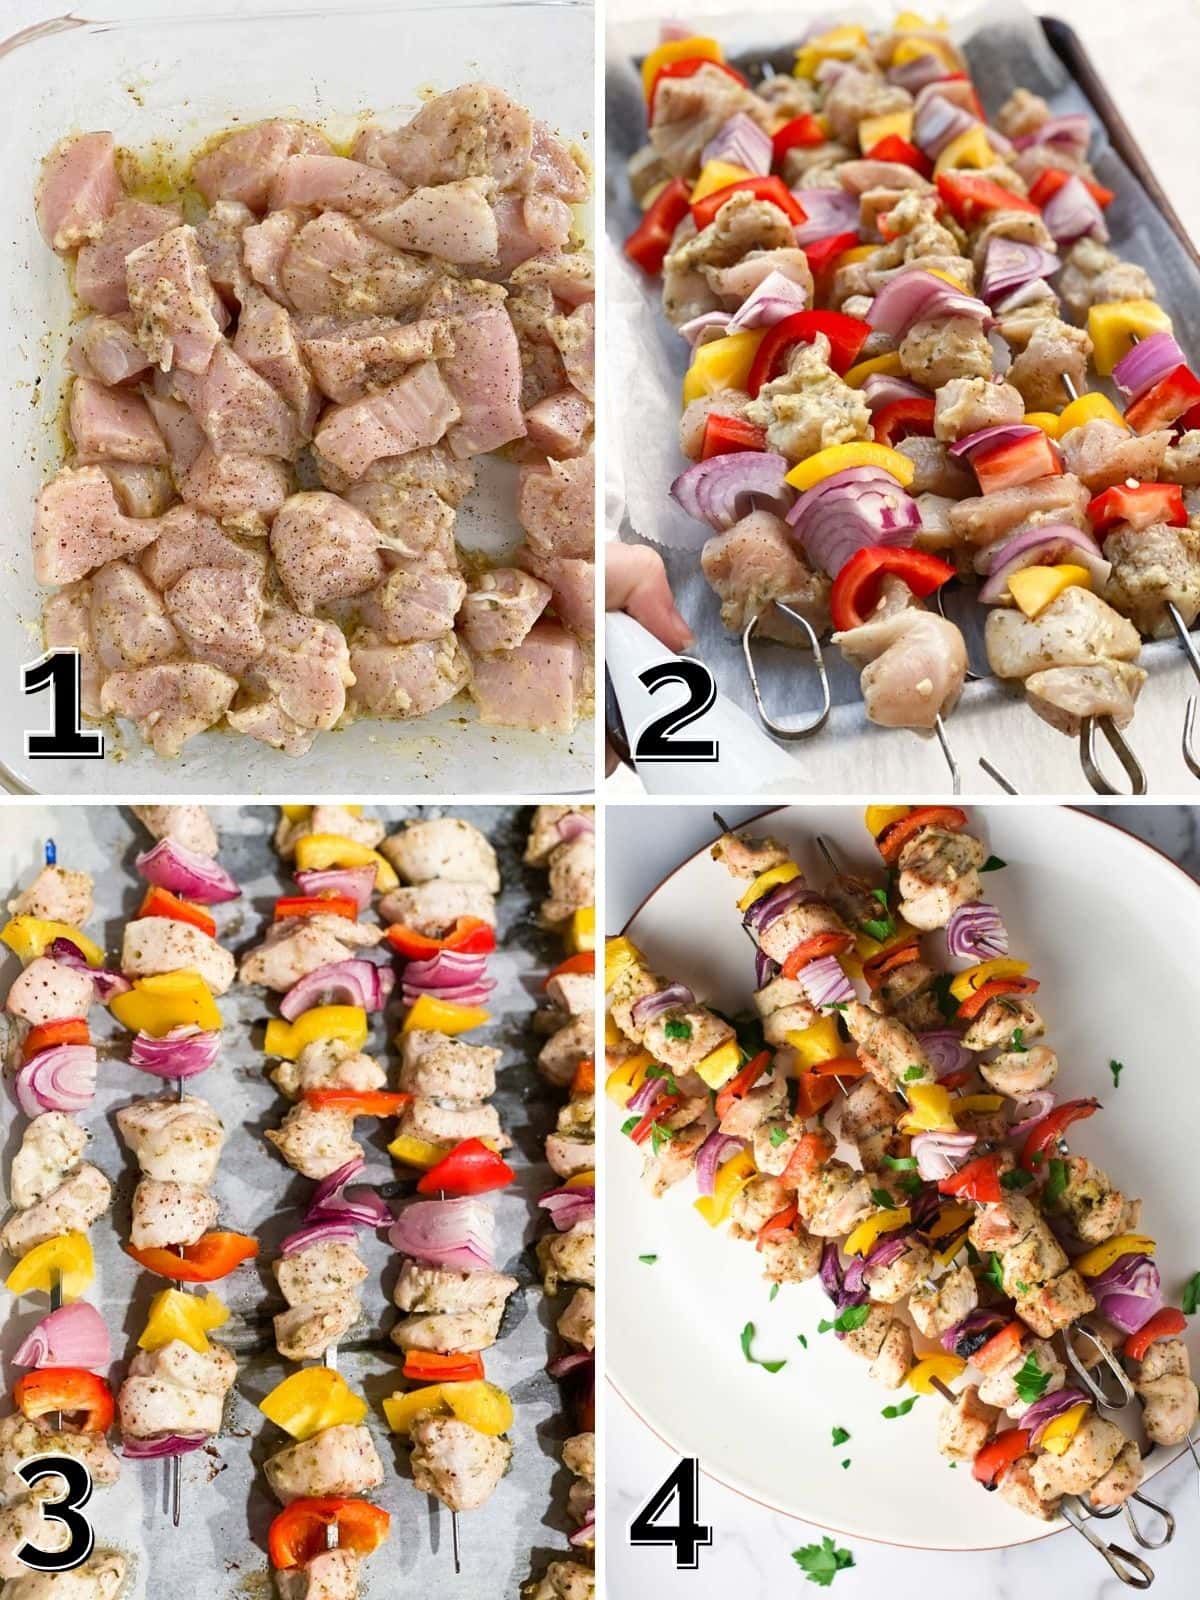 Process photos for how to make chicken kabobs in the oven from marinating meat to threading skewers.